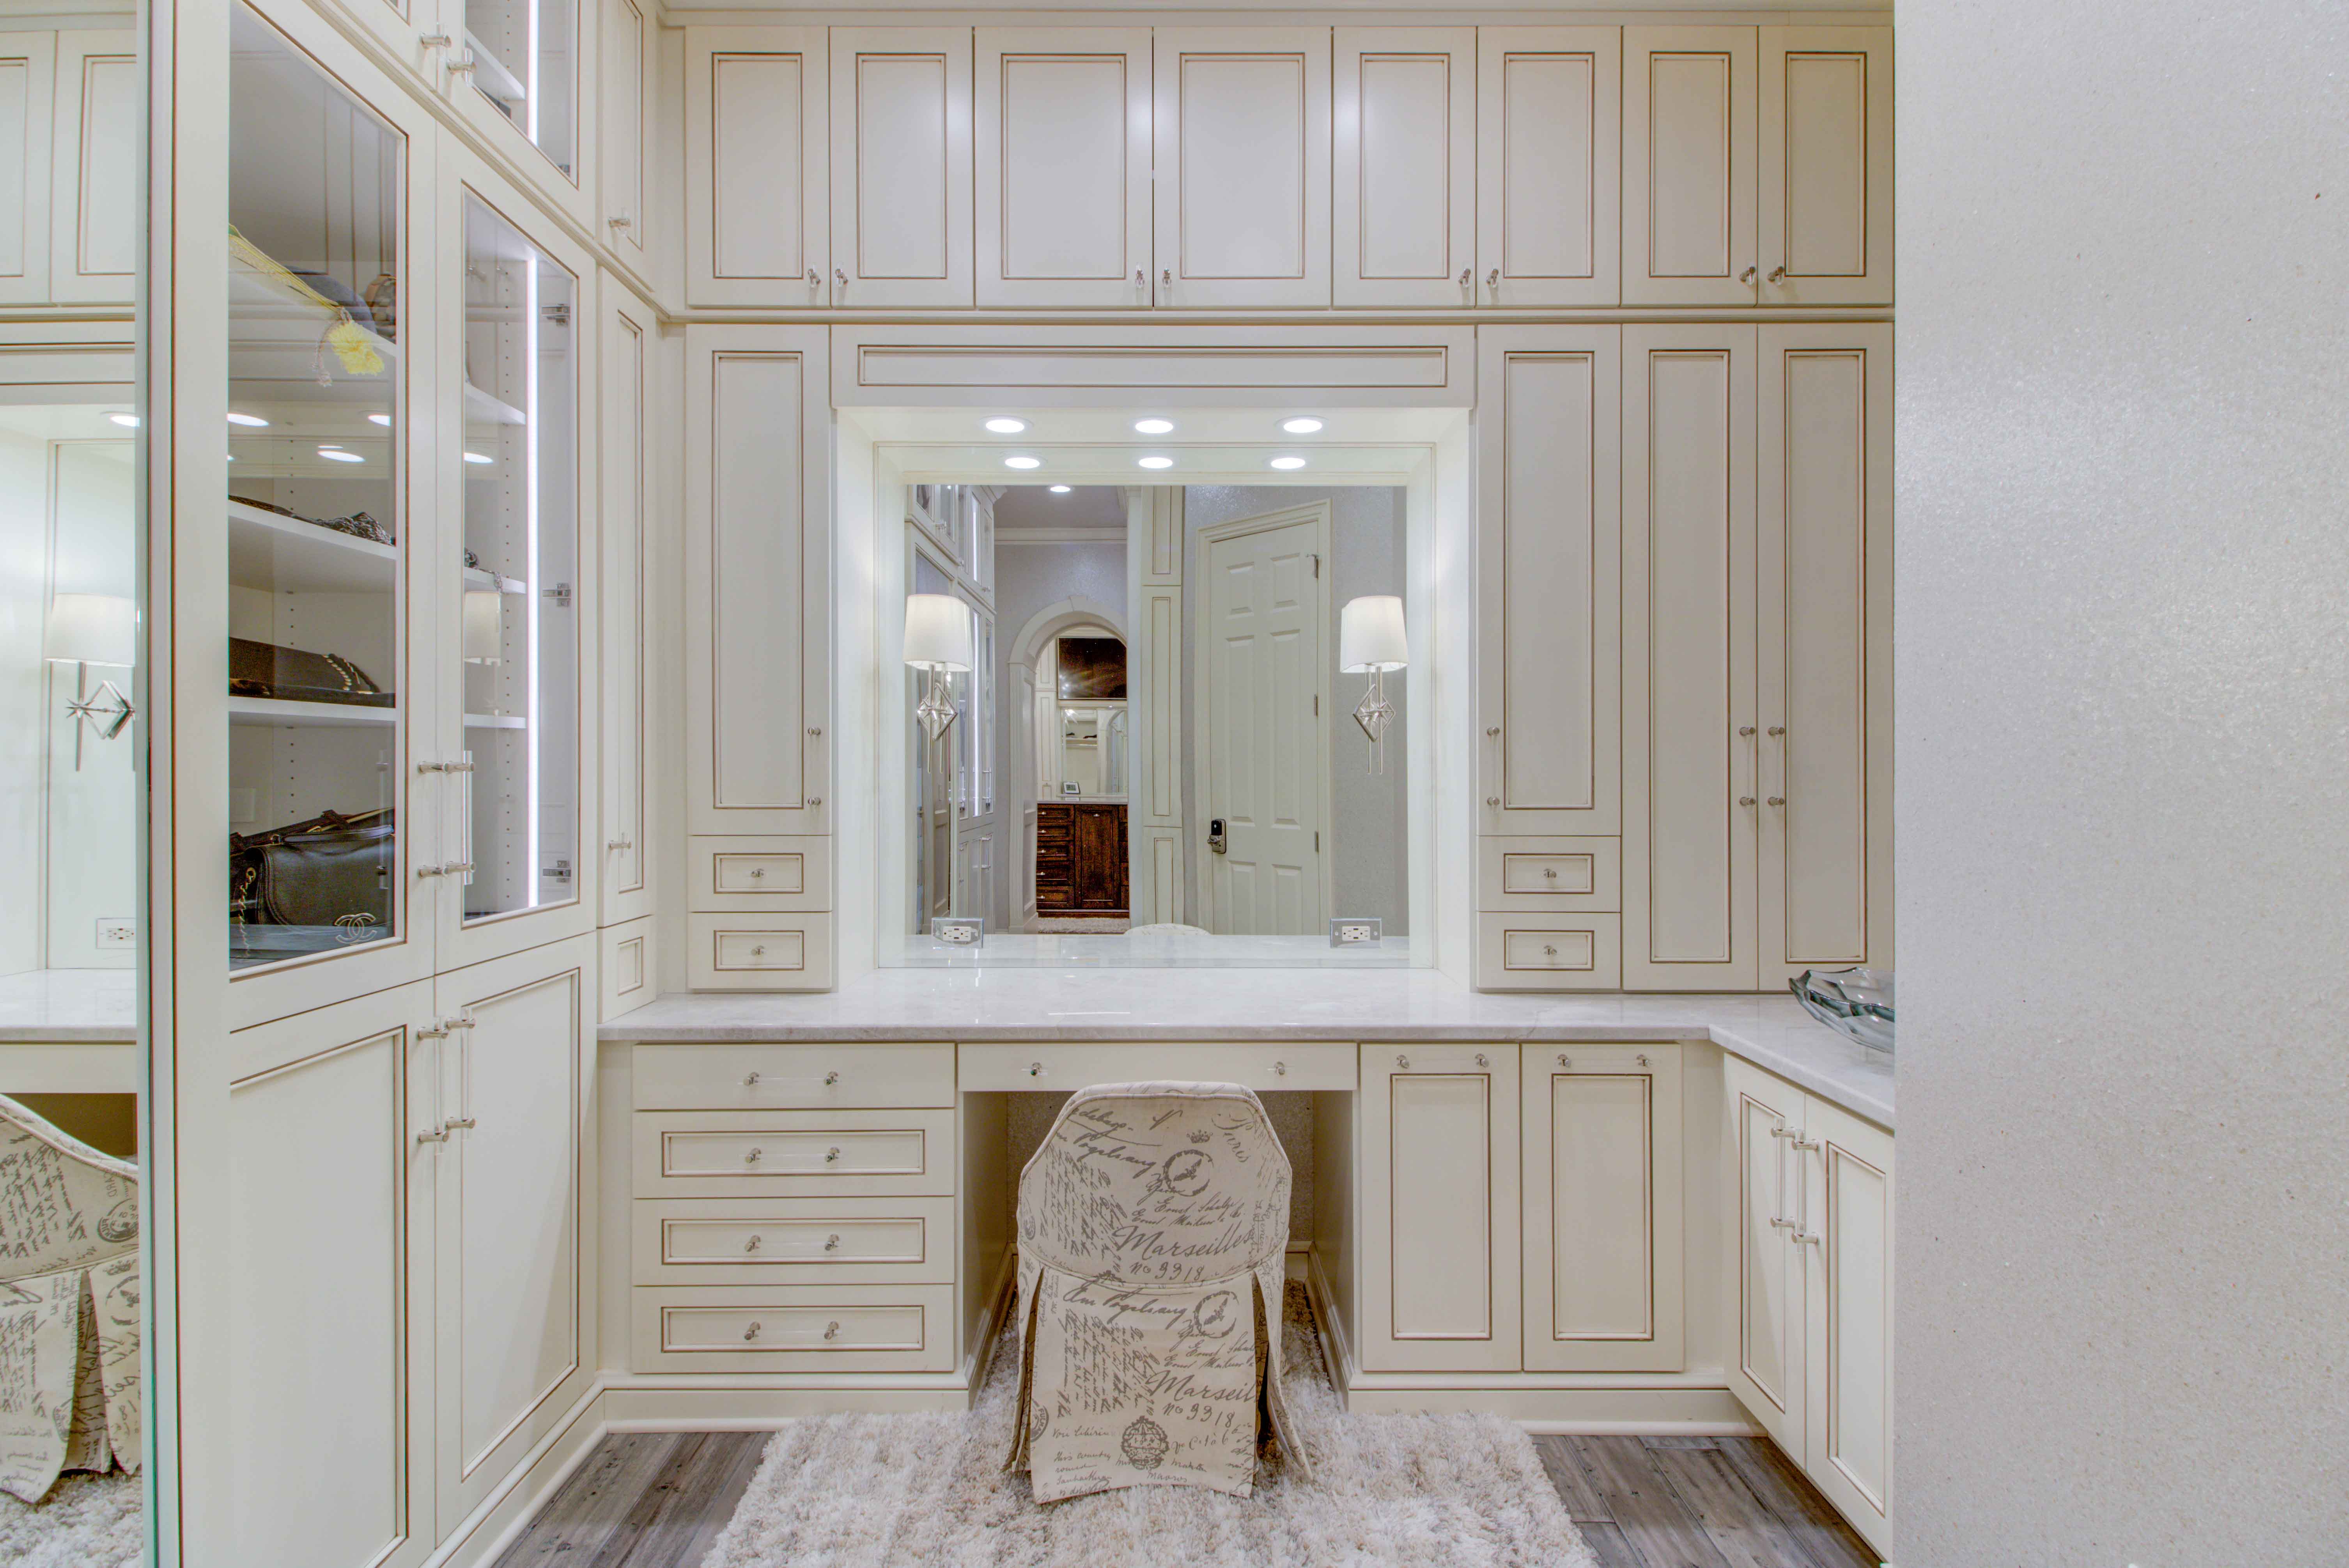 Stylish Closet Systems How Style Creates Luxury To Match Your Home Closet Factory